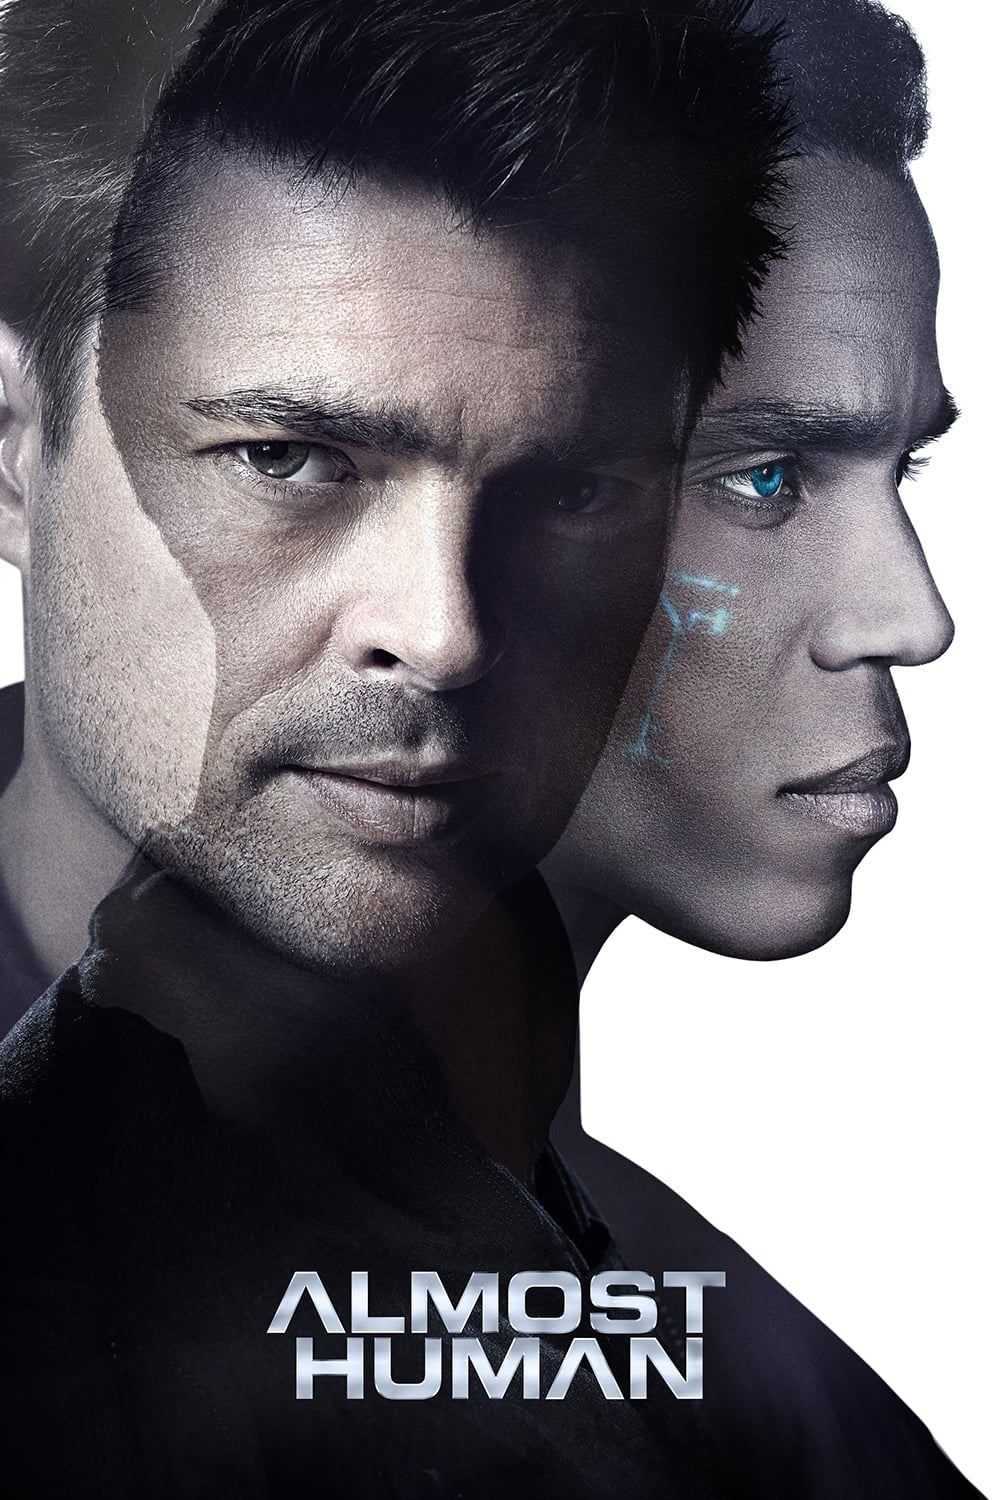 Almost Human TV Shows About Artificial Intelligence